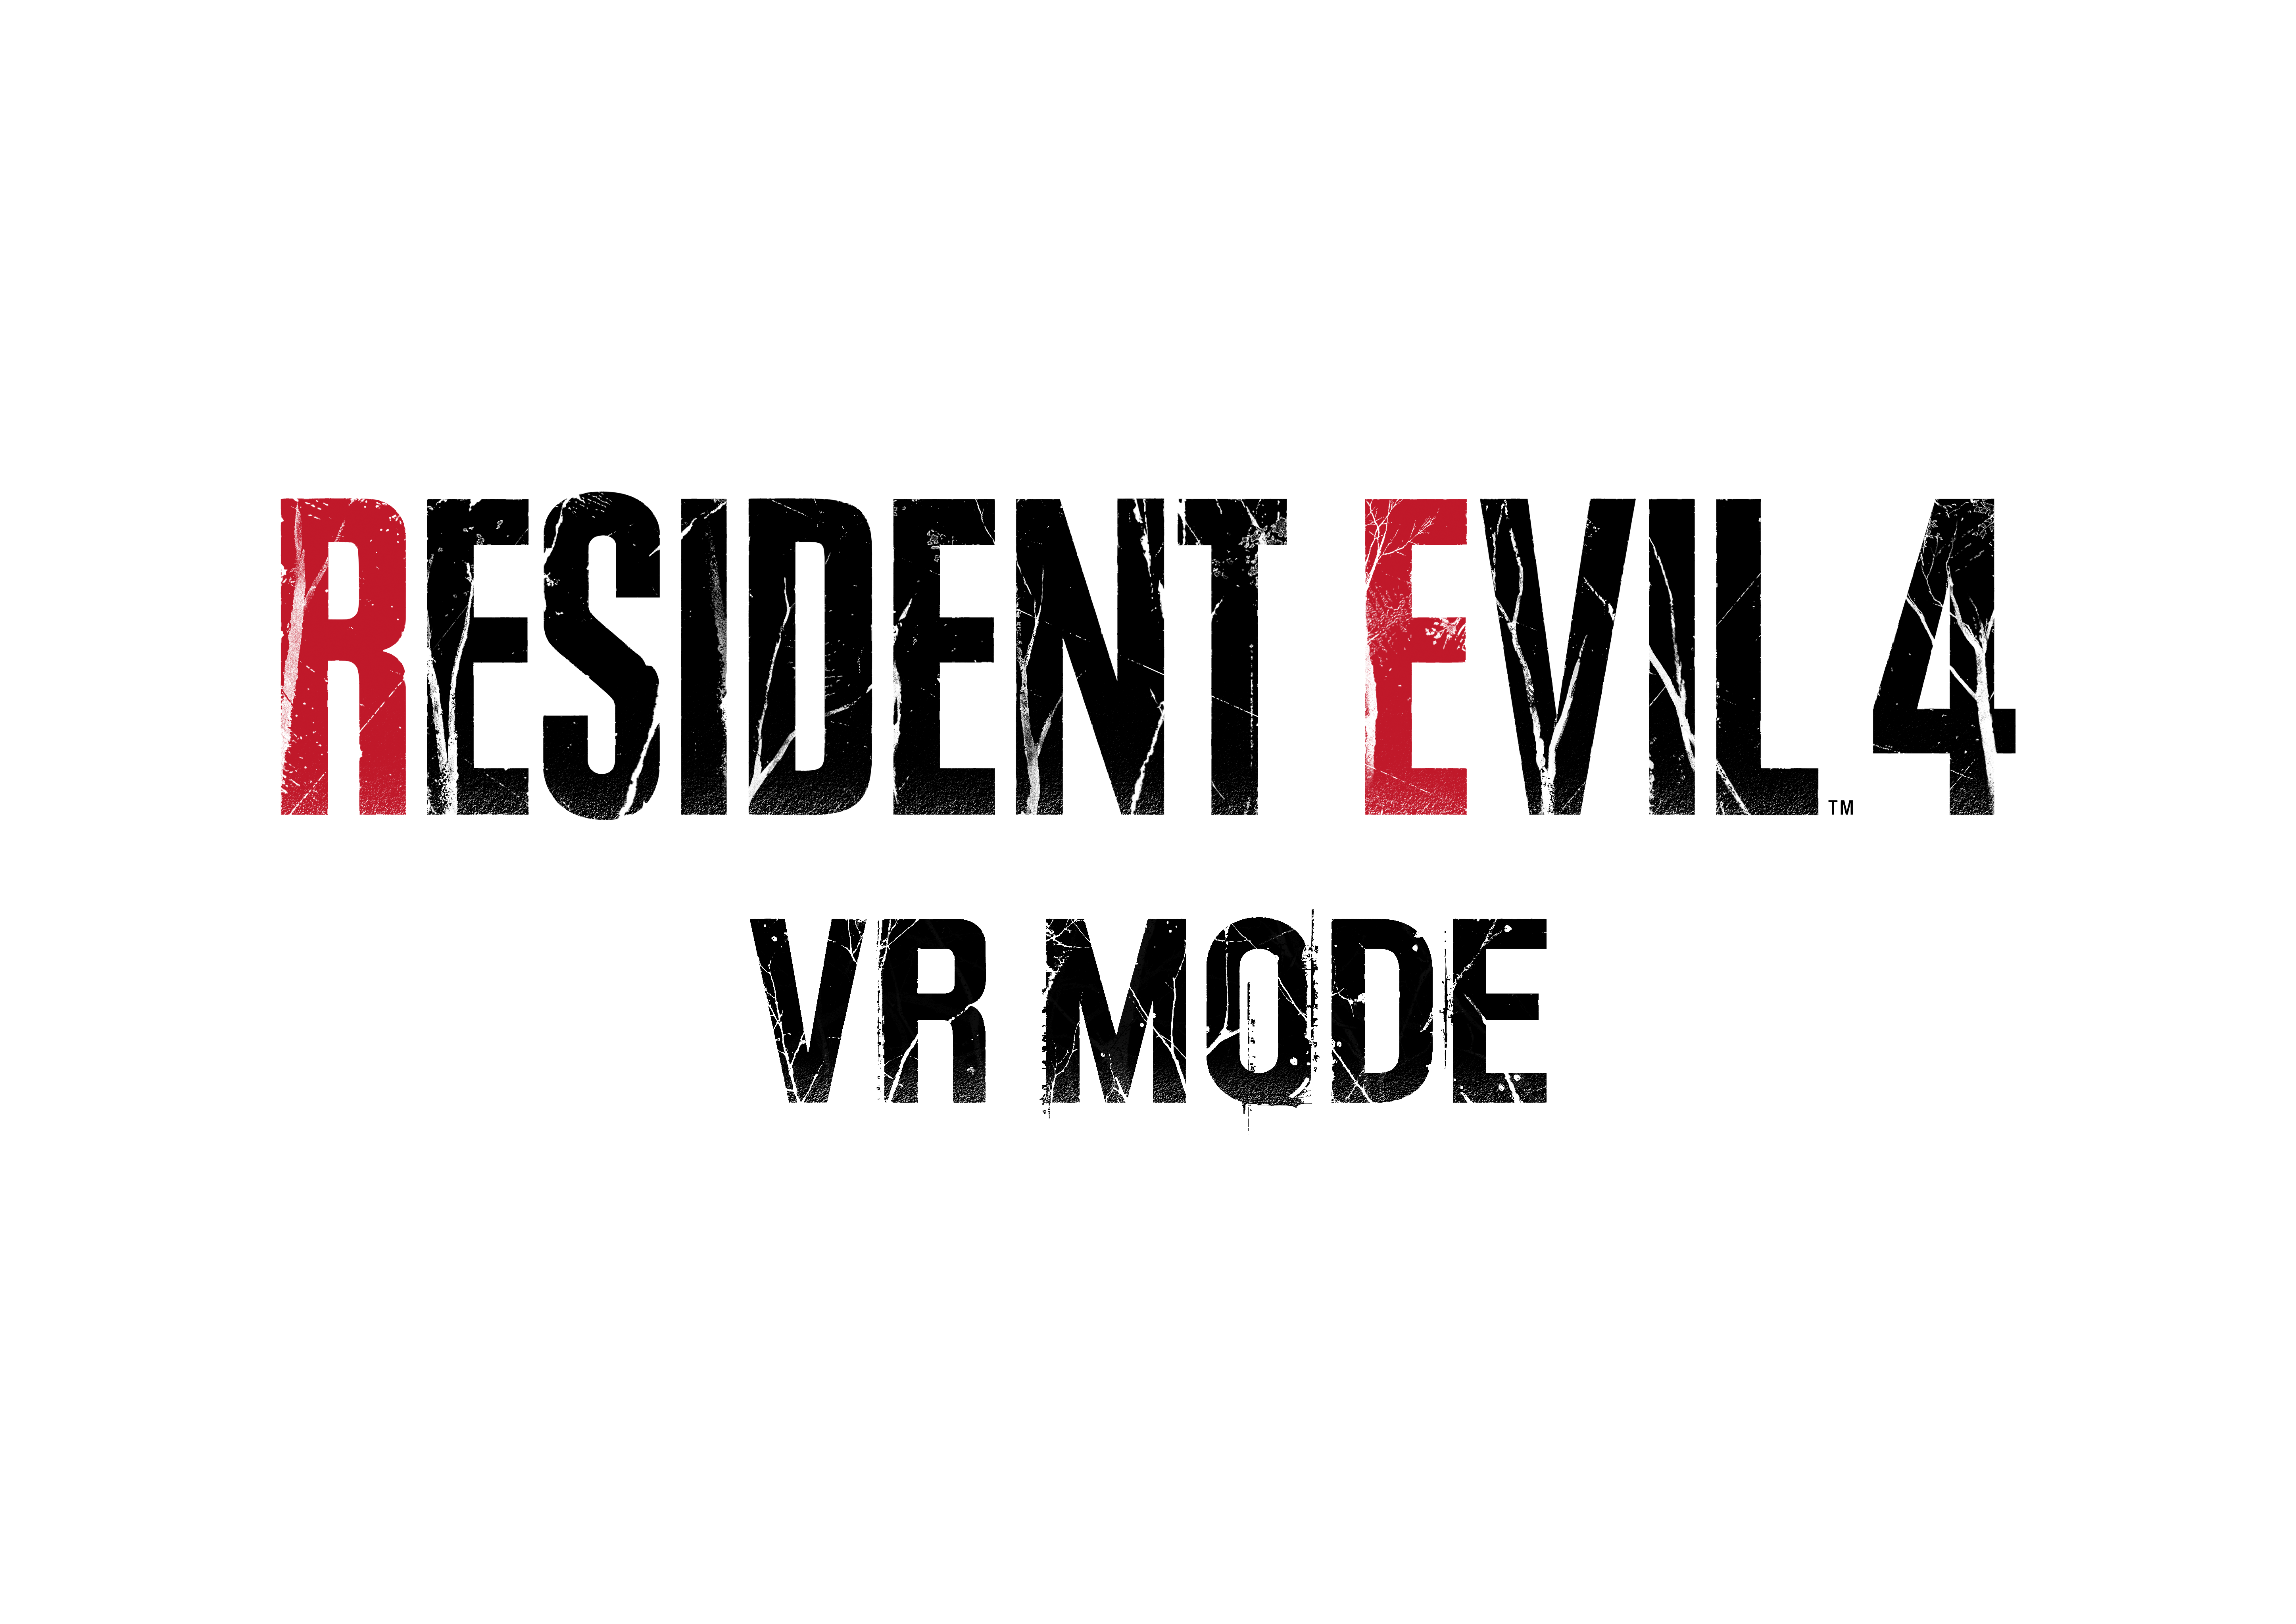 Resident Evil 4 remake - PS VR2 mode to be released as free DLC - Gematsu